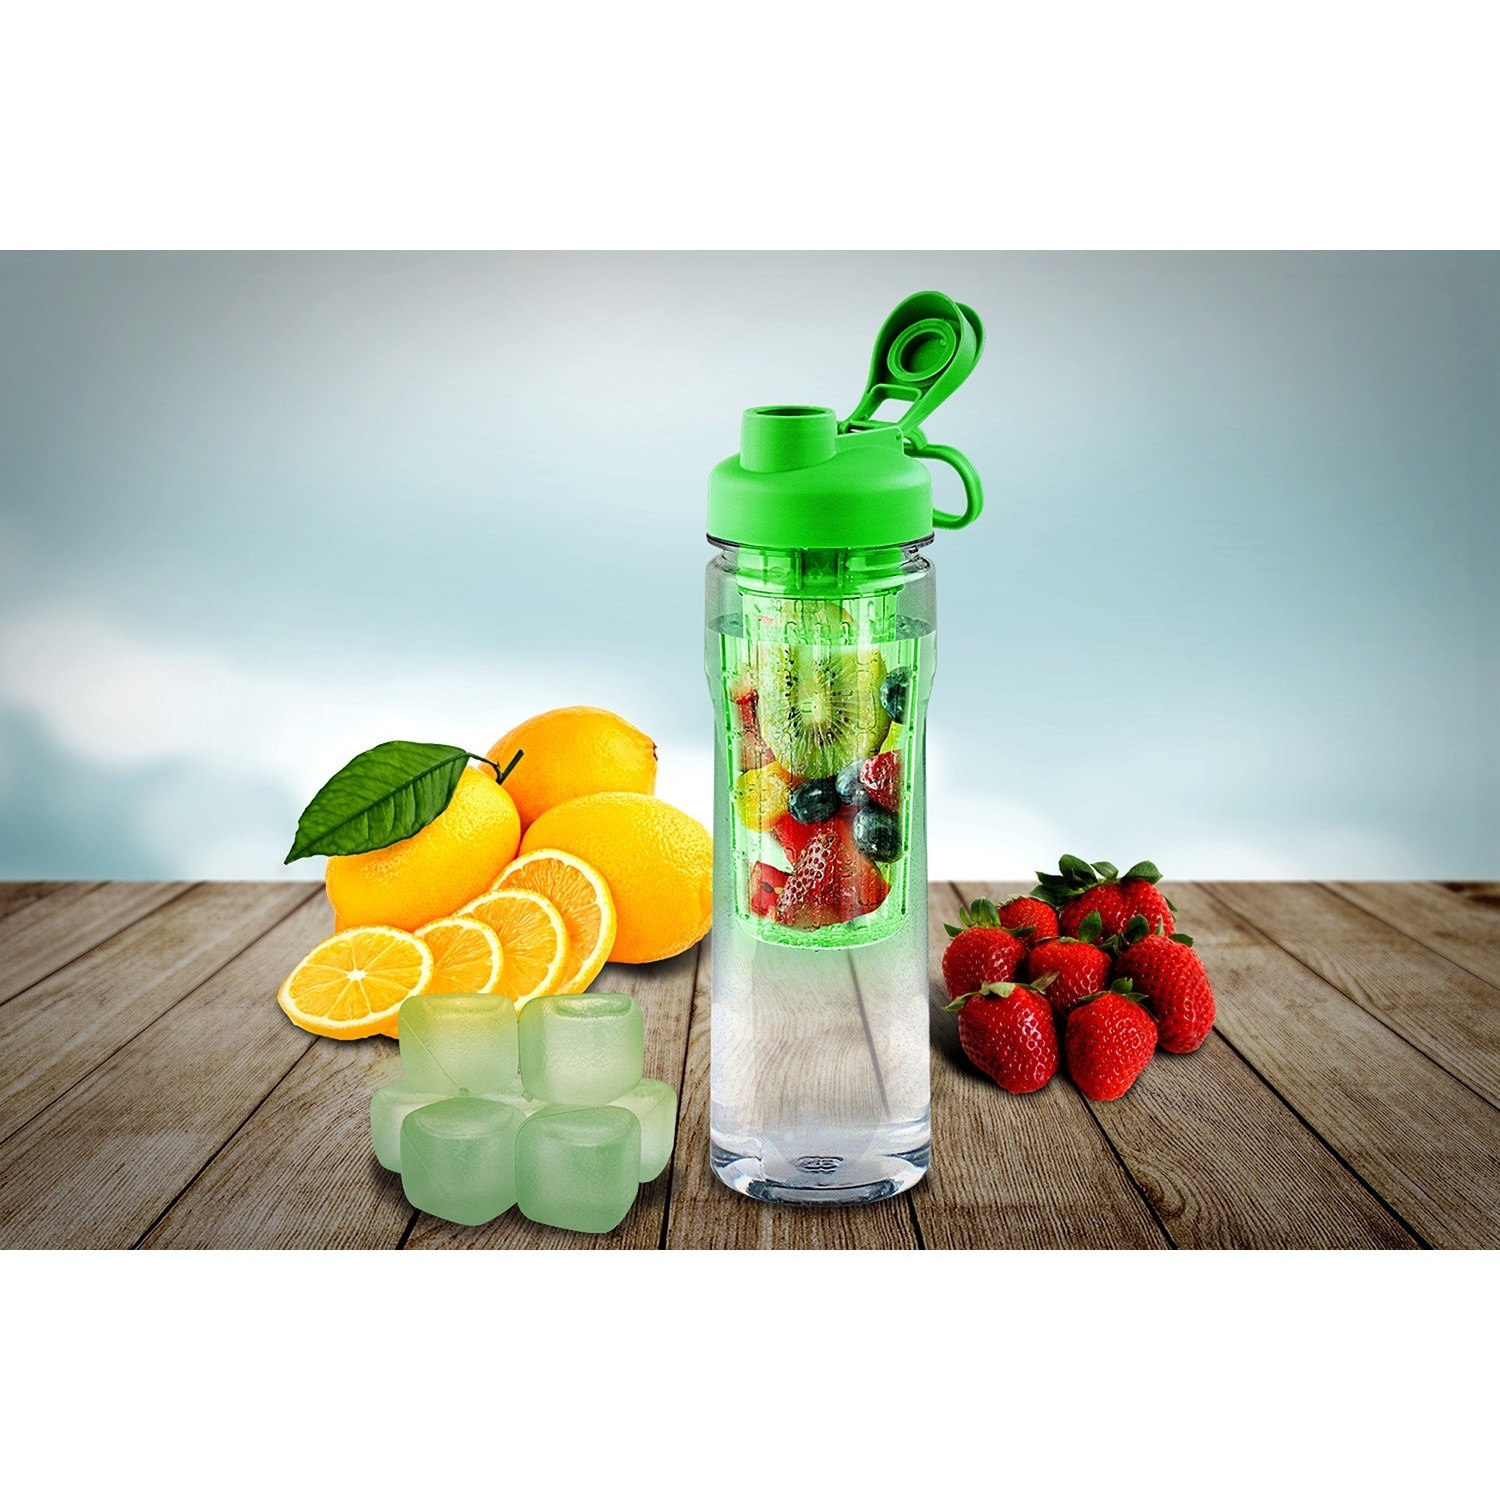 https://ak1.ostkcdn.com/images/products/11502051/Fruit-Infuser-Tritan-28-oz.-Water-Bottle-with-Reusable-Ice-Cubes-53ebb164-65cf-4252-9071-bce8aa1220bb.jpg